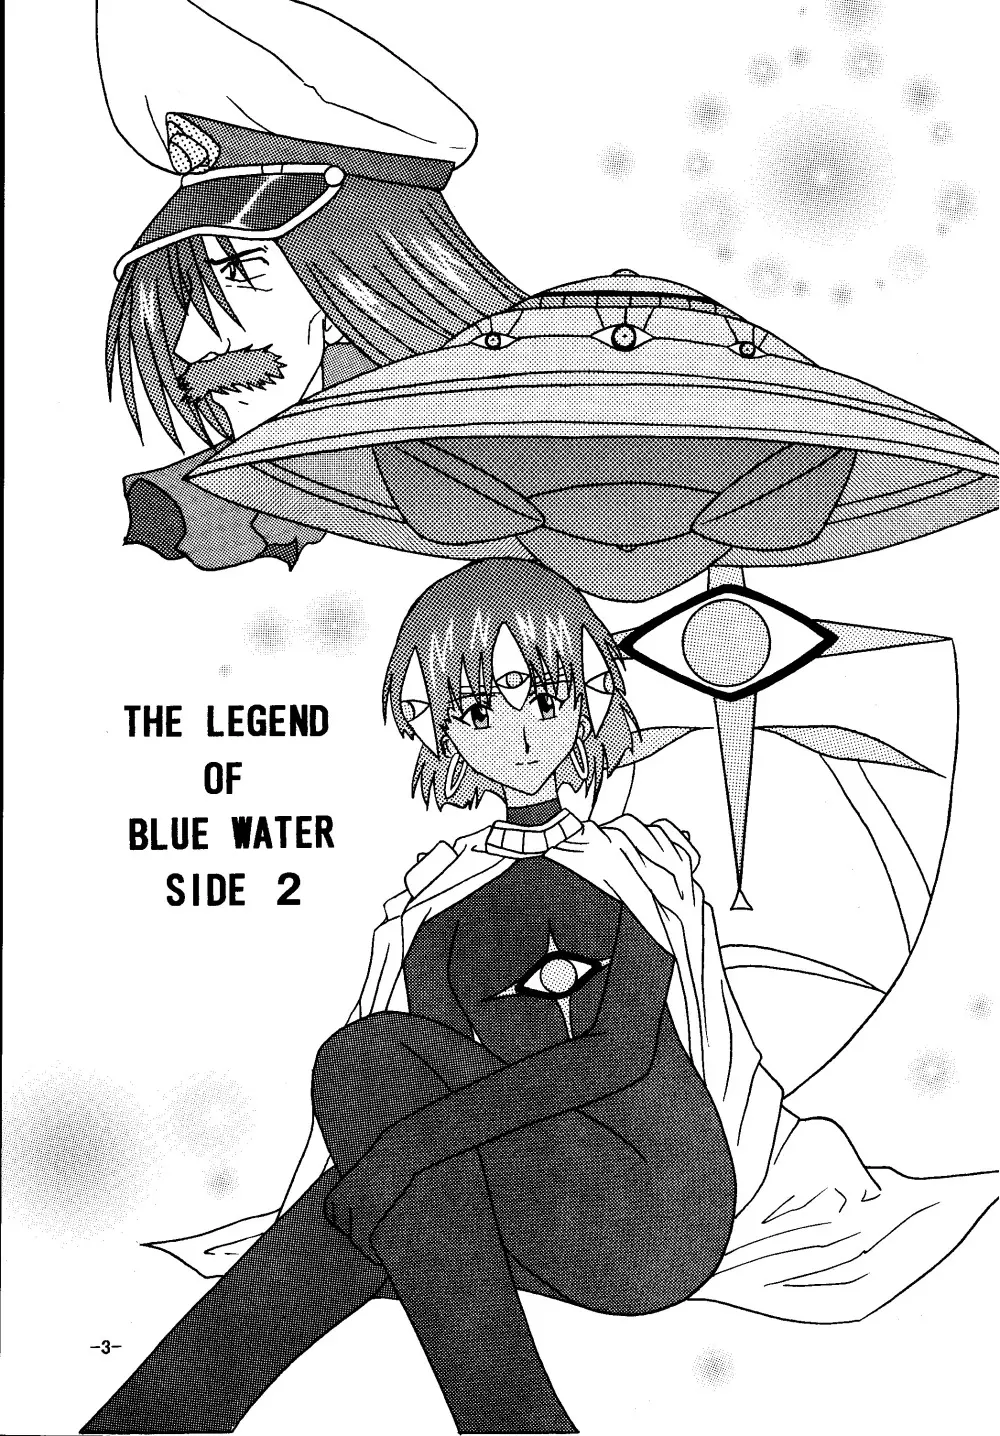 THE LEGEND OF BLUE WATER SIDE 2 - page2